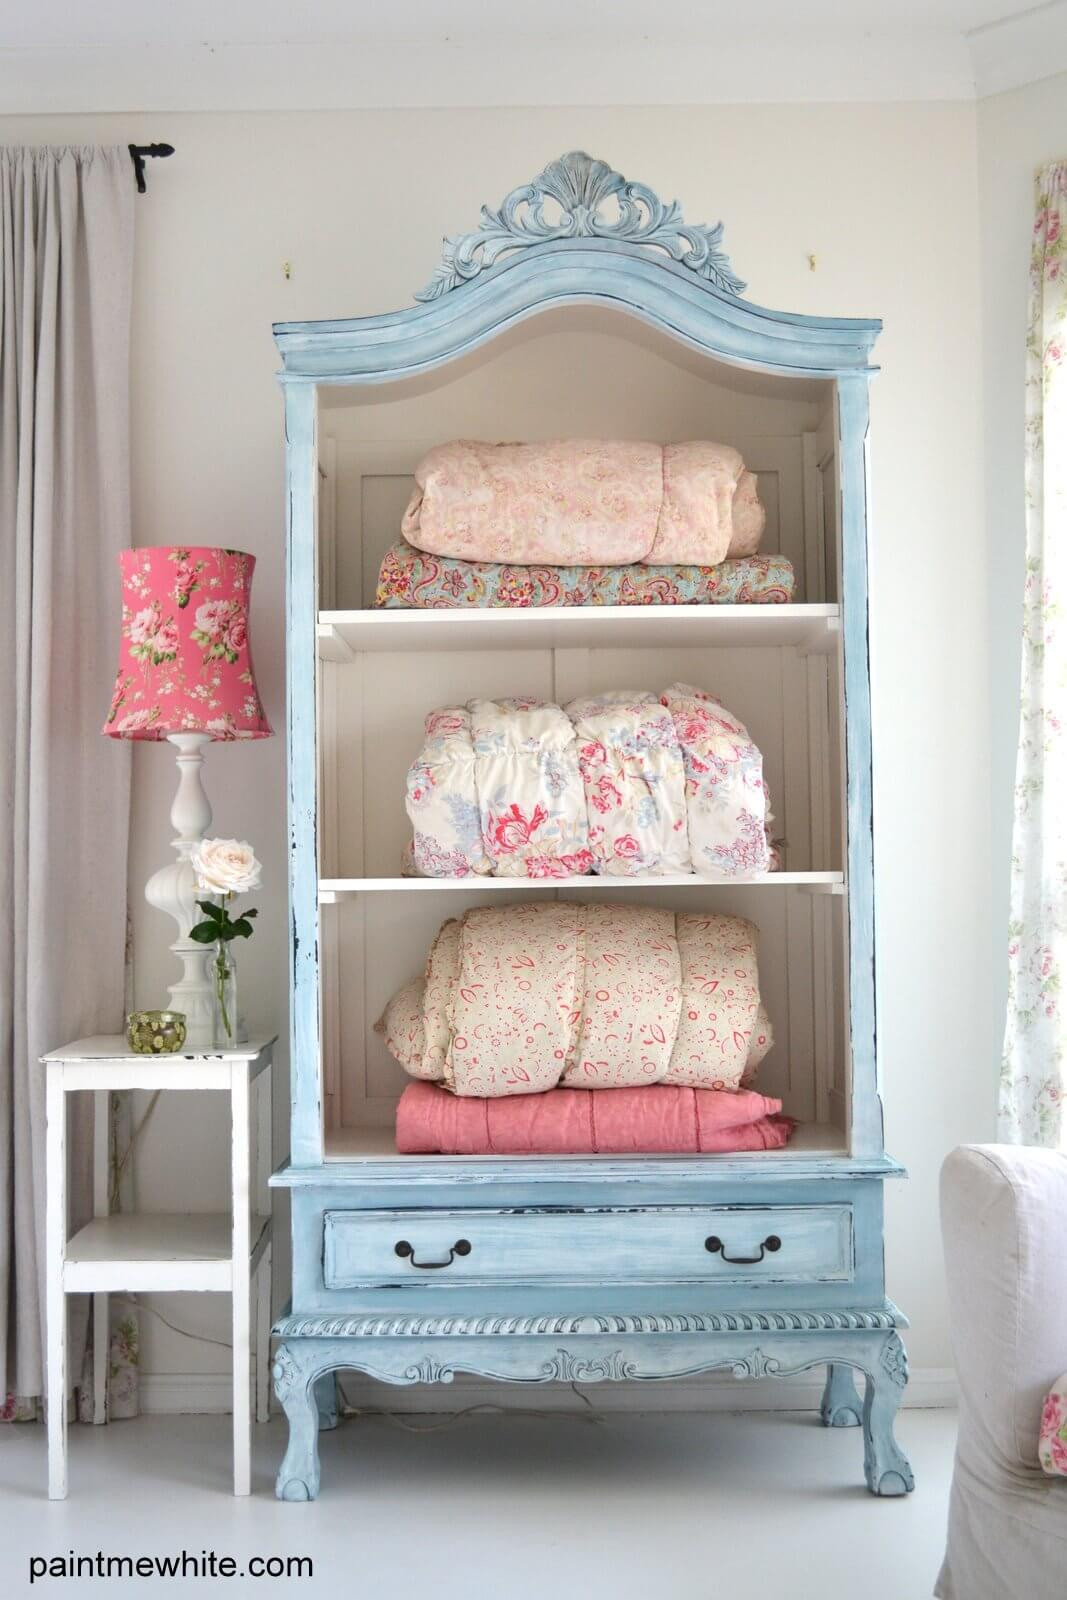 Shabby Chic Bedroom Accessories Luxury 35 Best Shabby Chic Bedroom Design and Decor Ideas for 2020